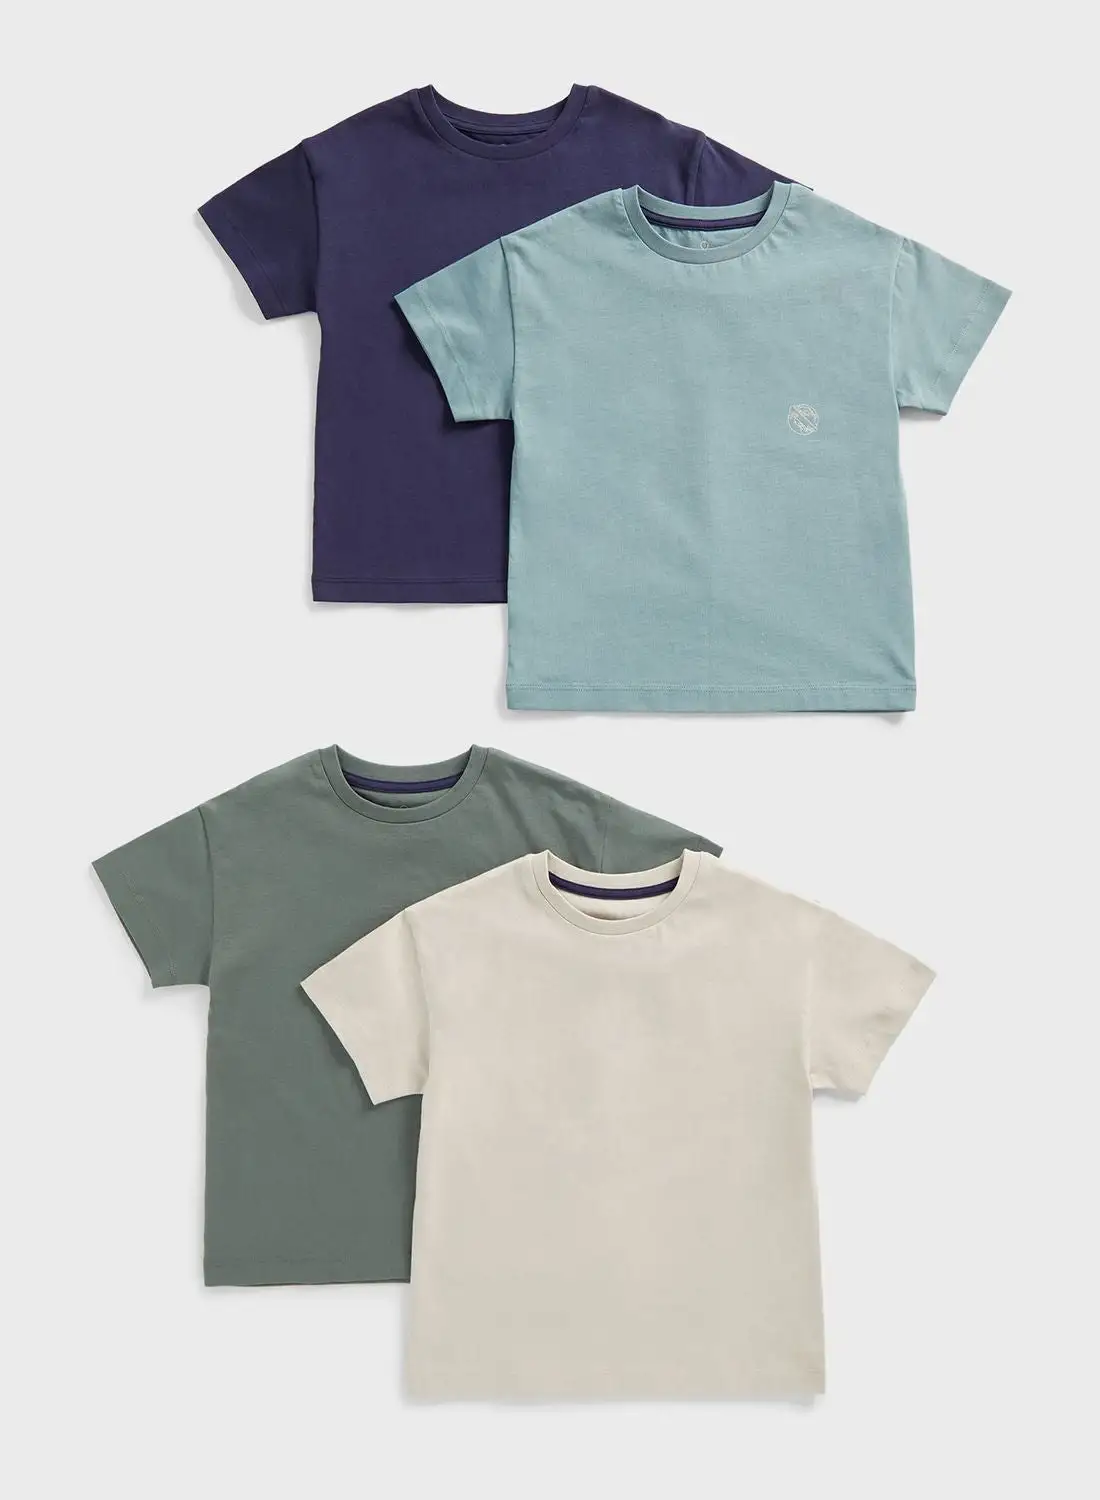 mothercare Kids 4 Pack Assorted T-Shirt